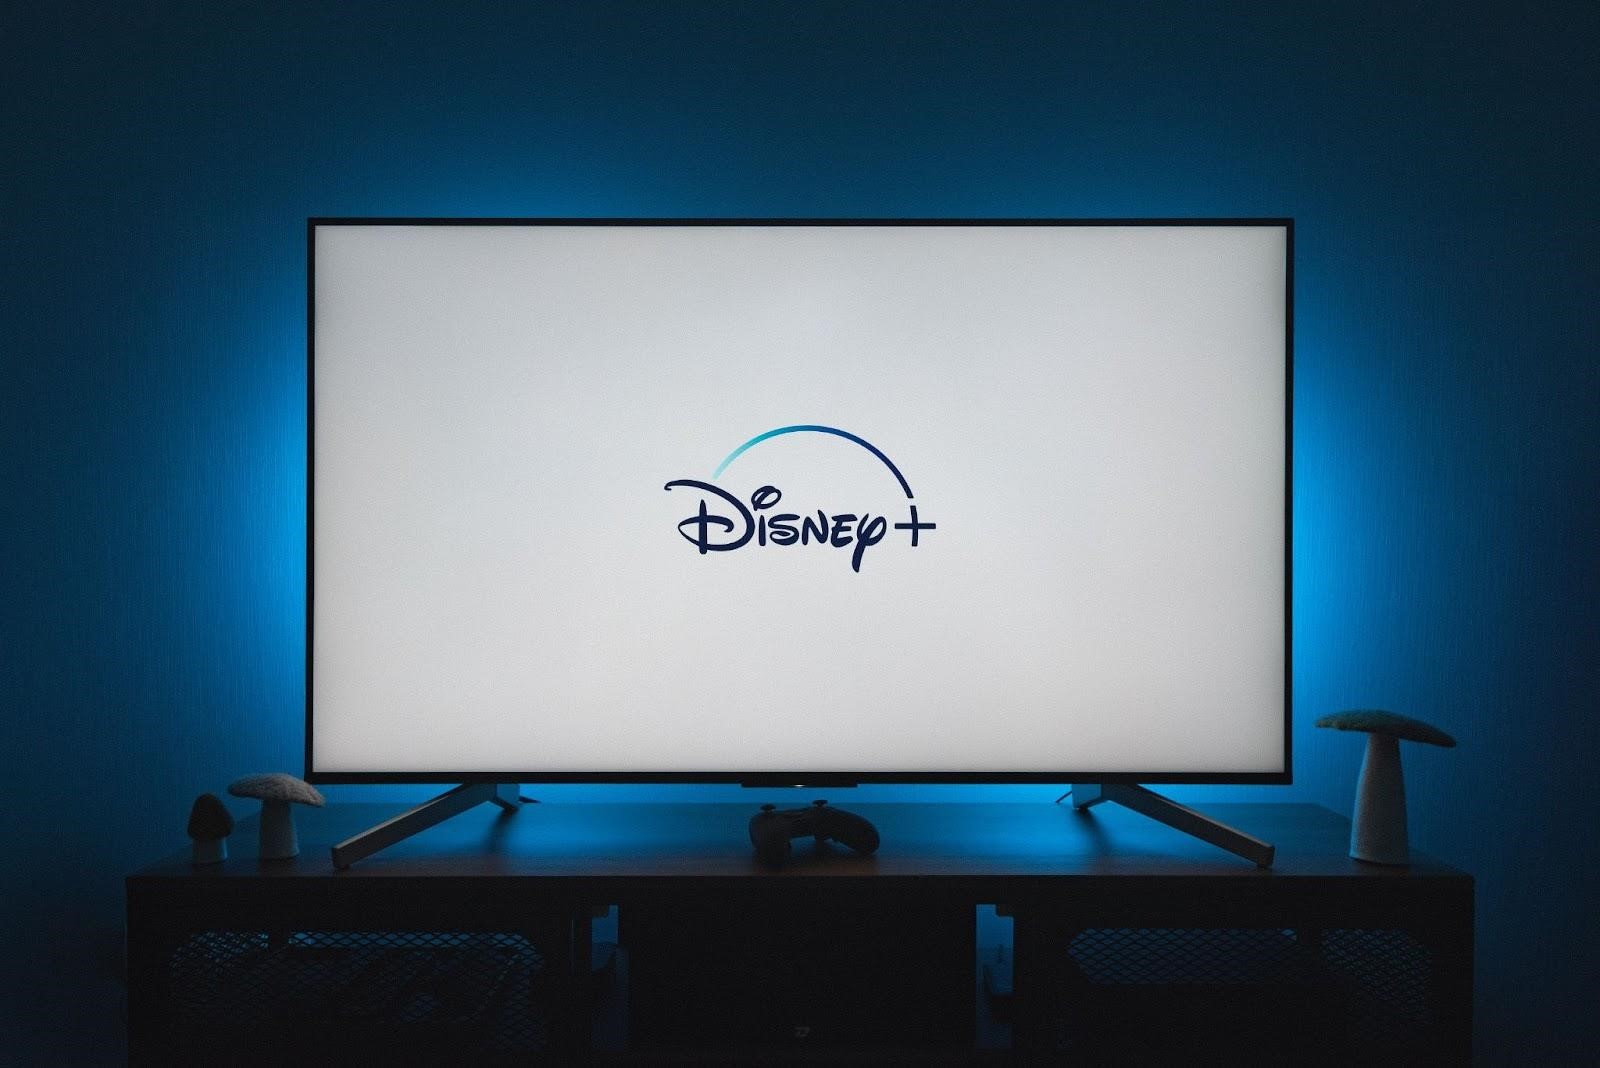 Disney And ESPN No Longer Available on Sling TV And Dish